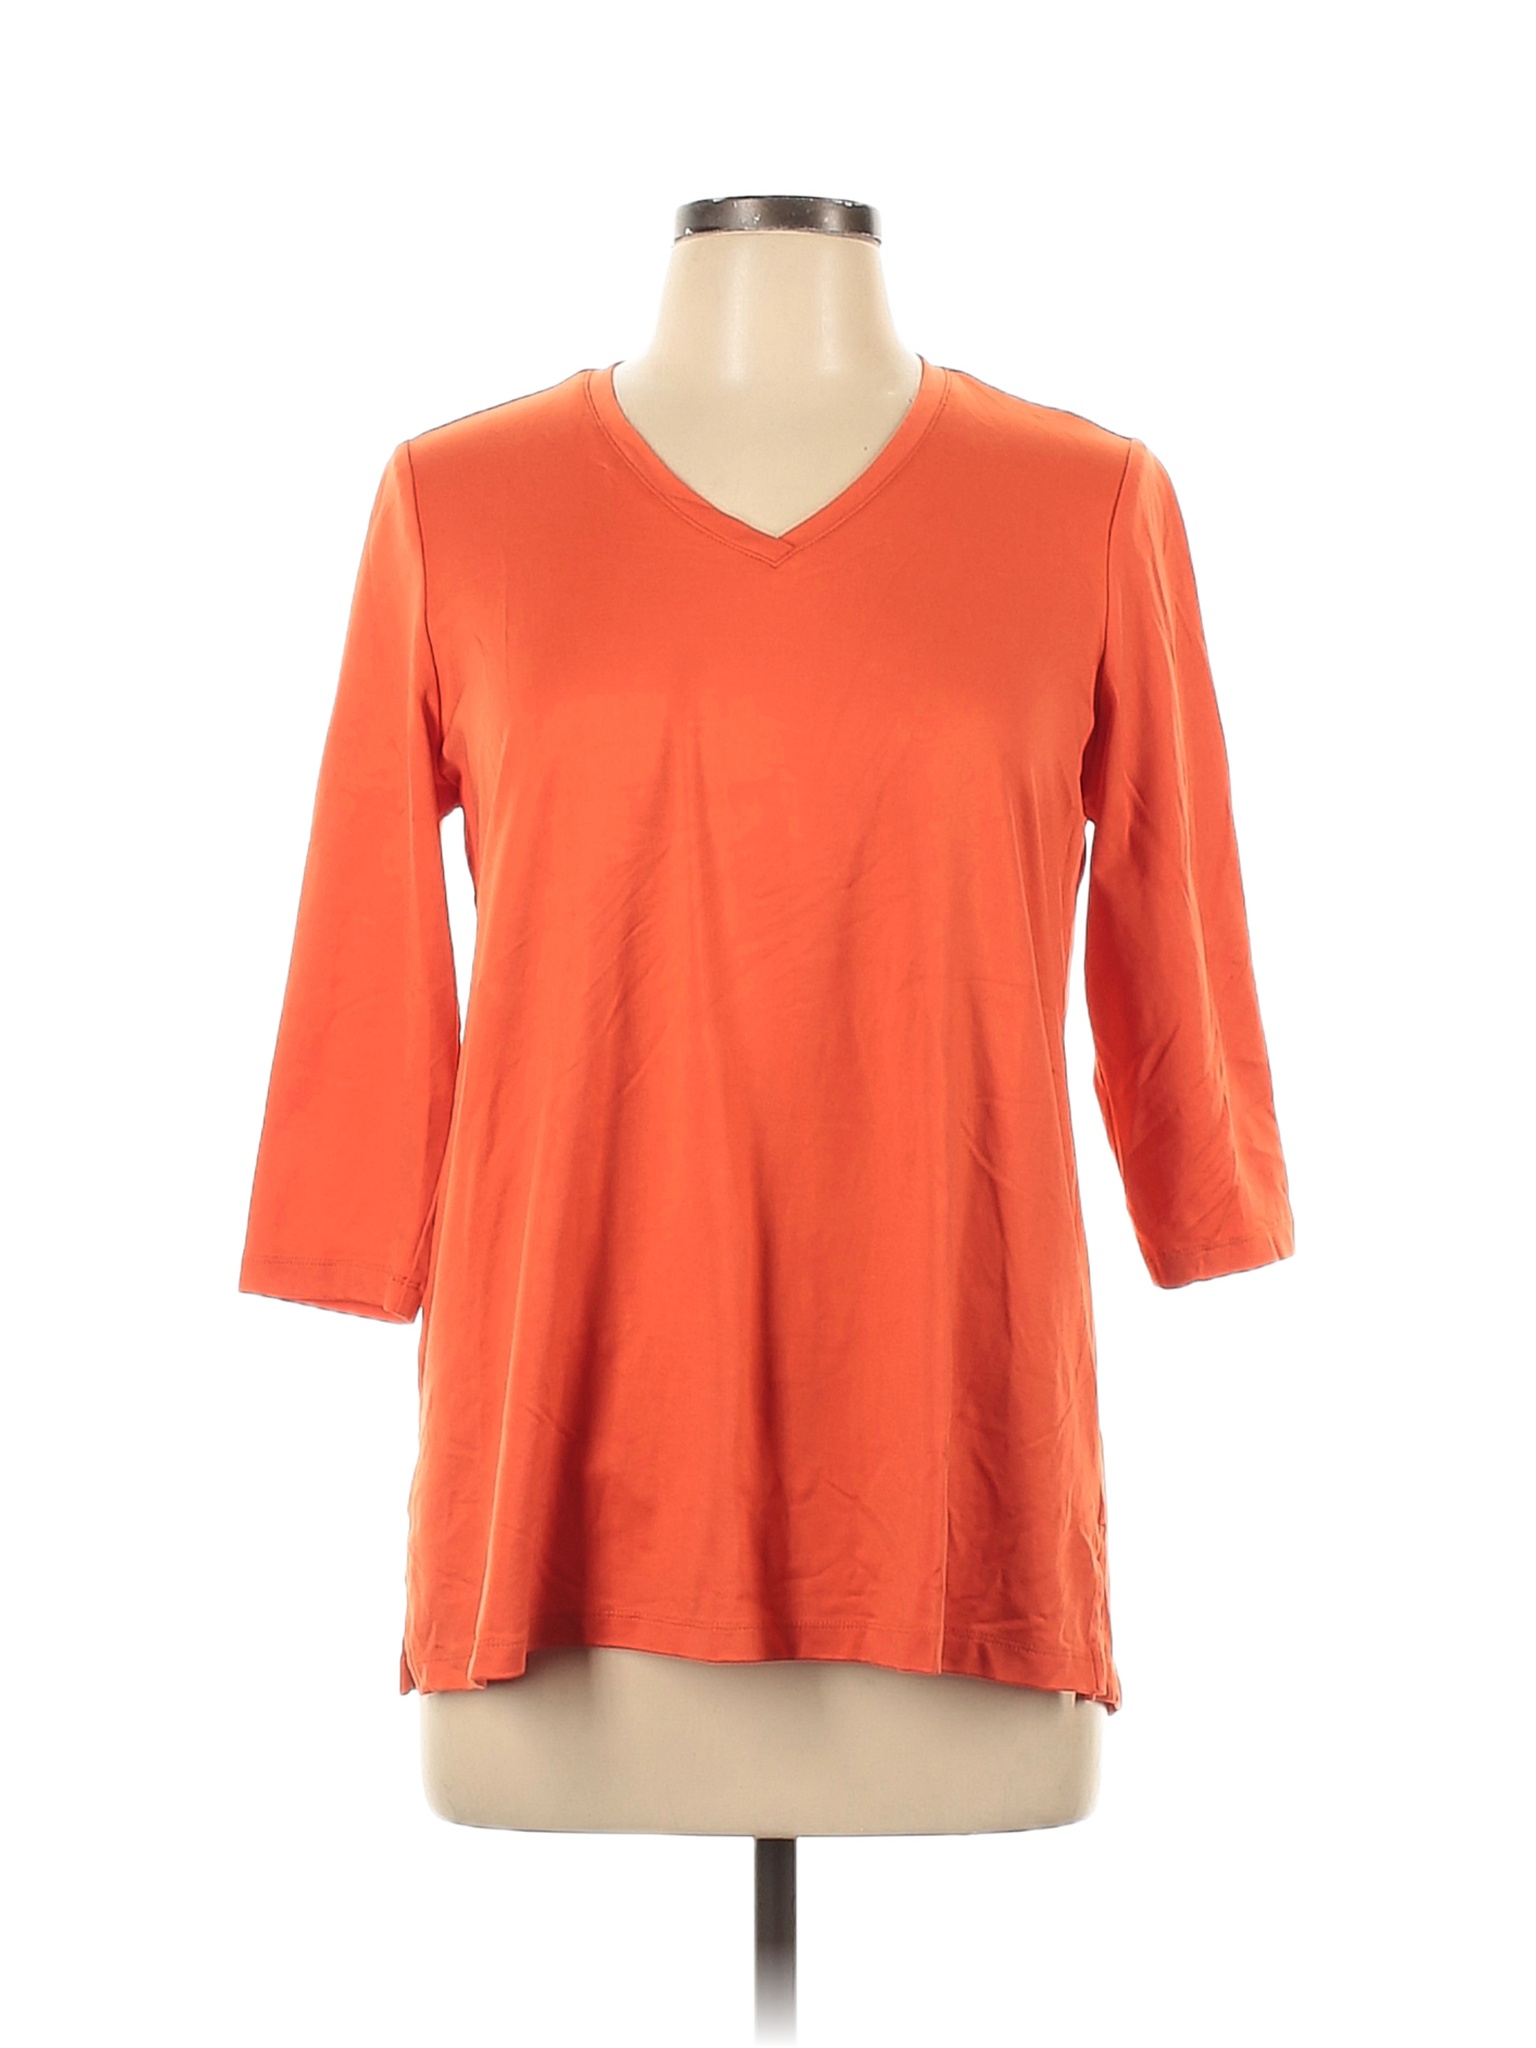 A'nue Miami Solid Colored Orange 3/4 Sleeve T-Shirt Size L - 73